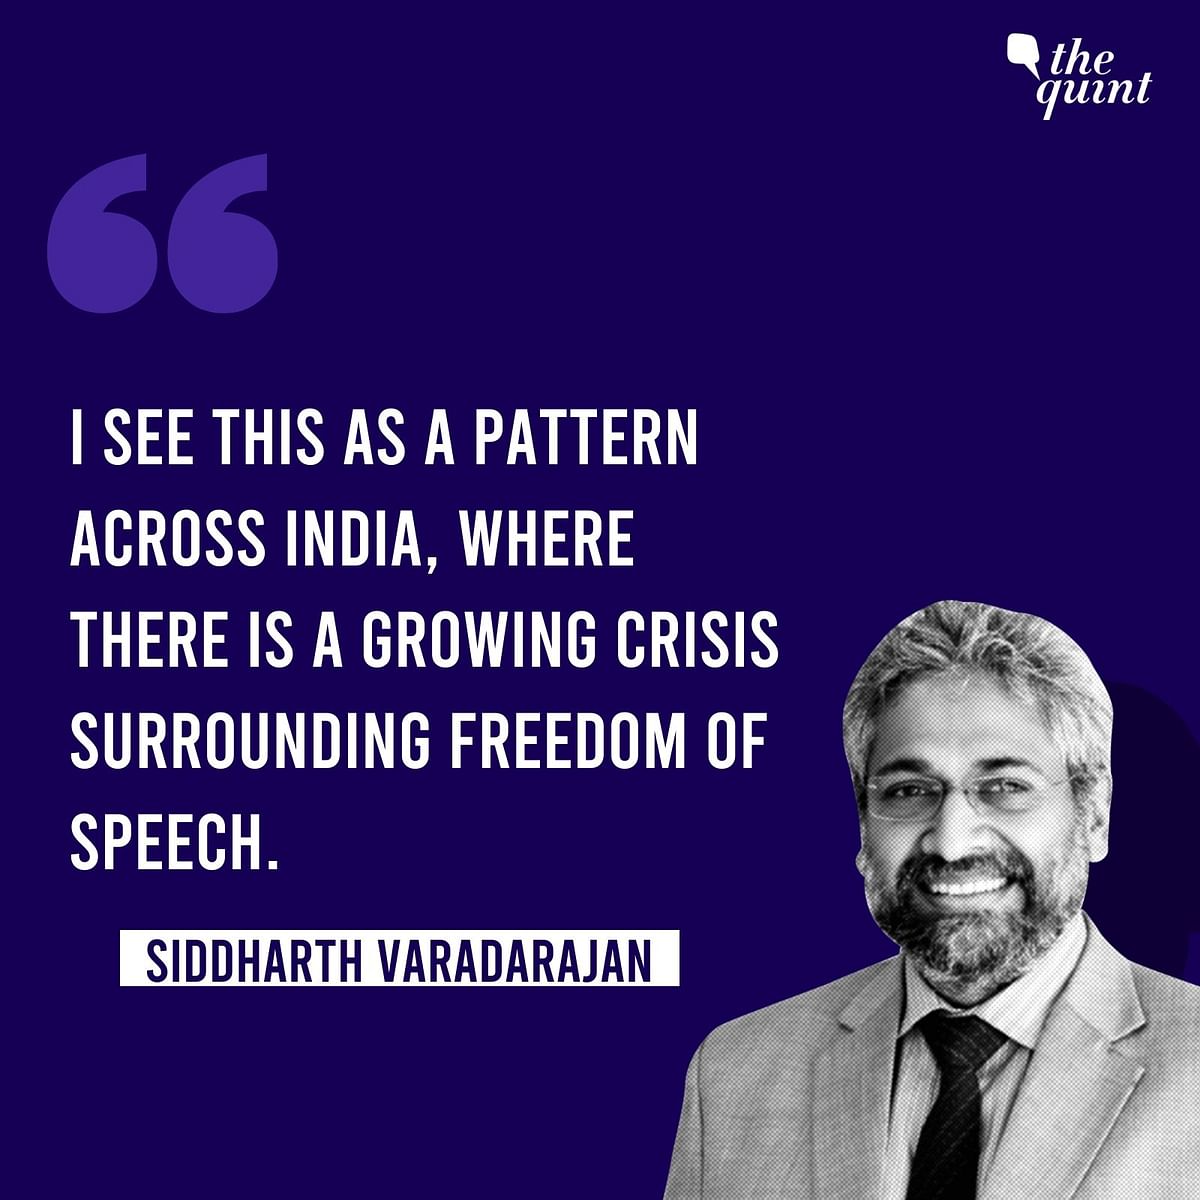 Siddharth Varadarajan said the UP govt’s actions show “the intention is to harass, intimidate, perhaps even arrest.”